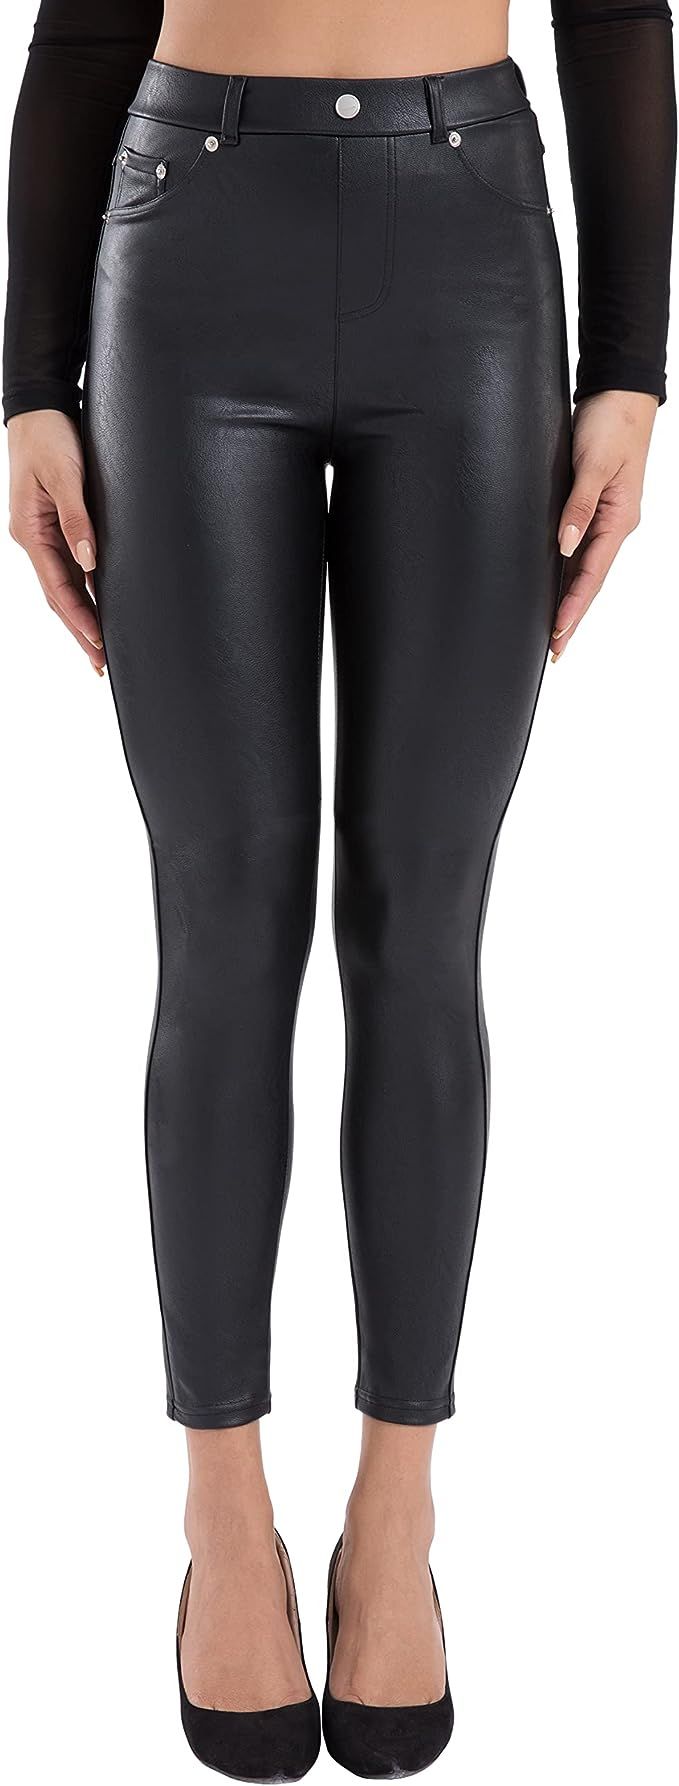 Tagoo Faux Leather Leggings for Women High Waisted Pleather Pants Stretch Tights with Pockets | Amazon (US)